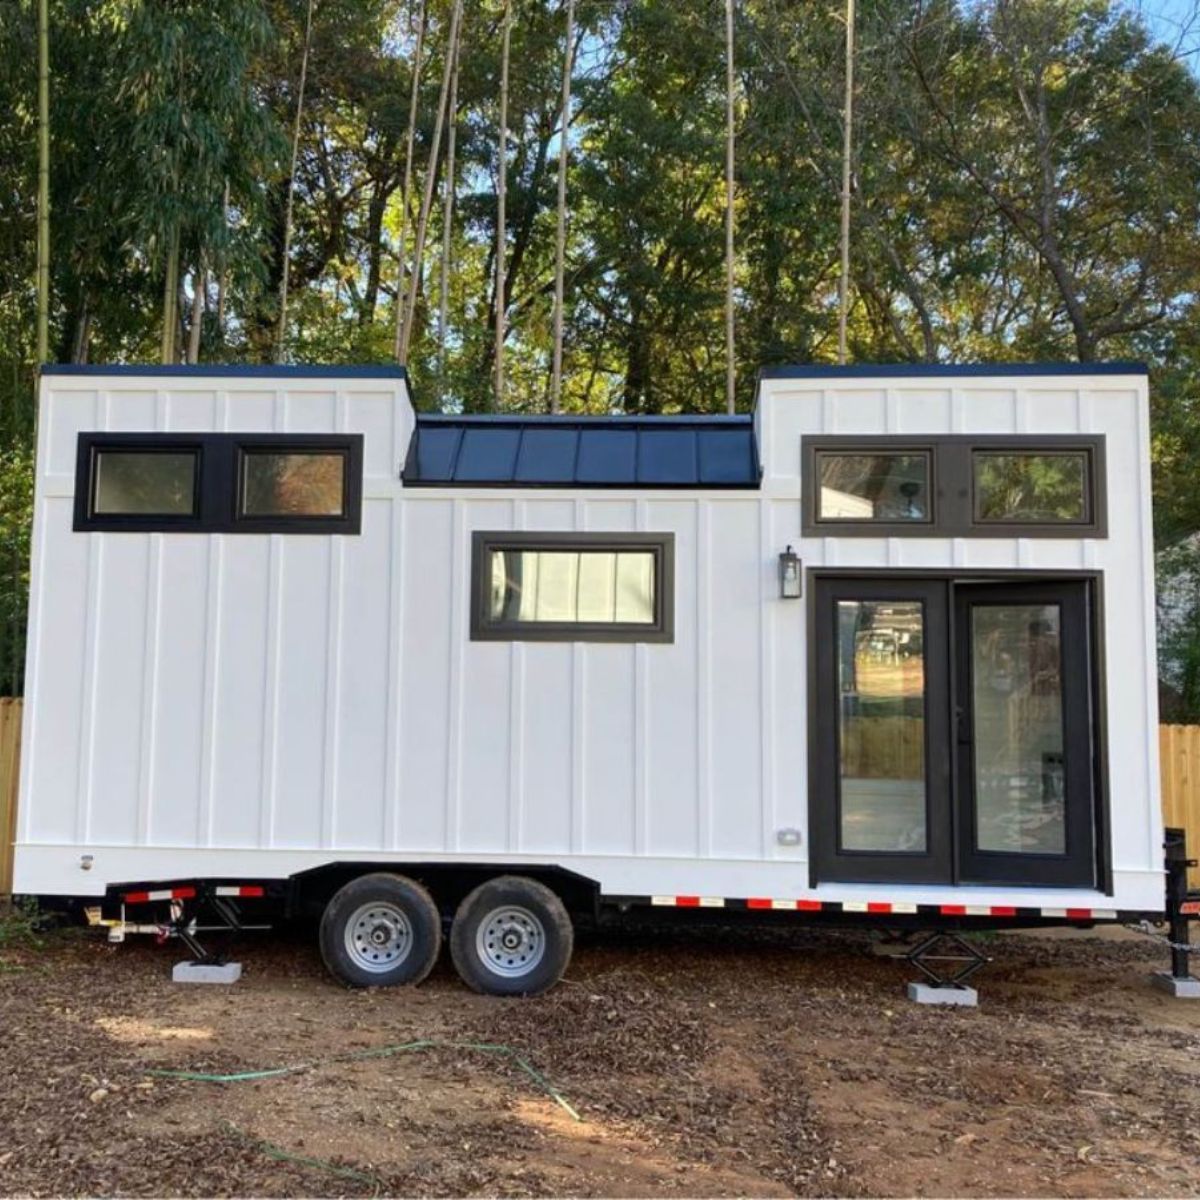 Certified Tiny House On Wheels Is A 70k Property That Sleeps Four!